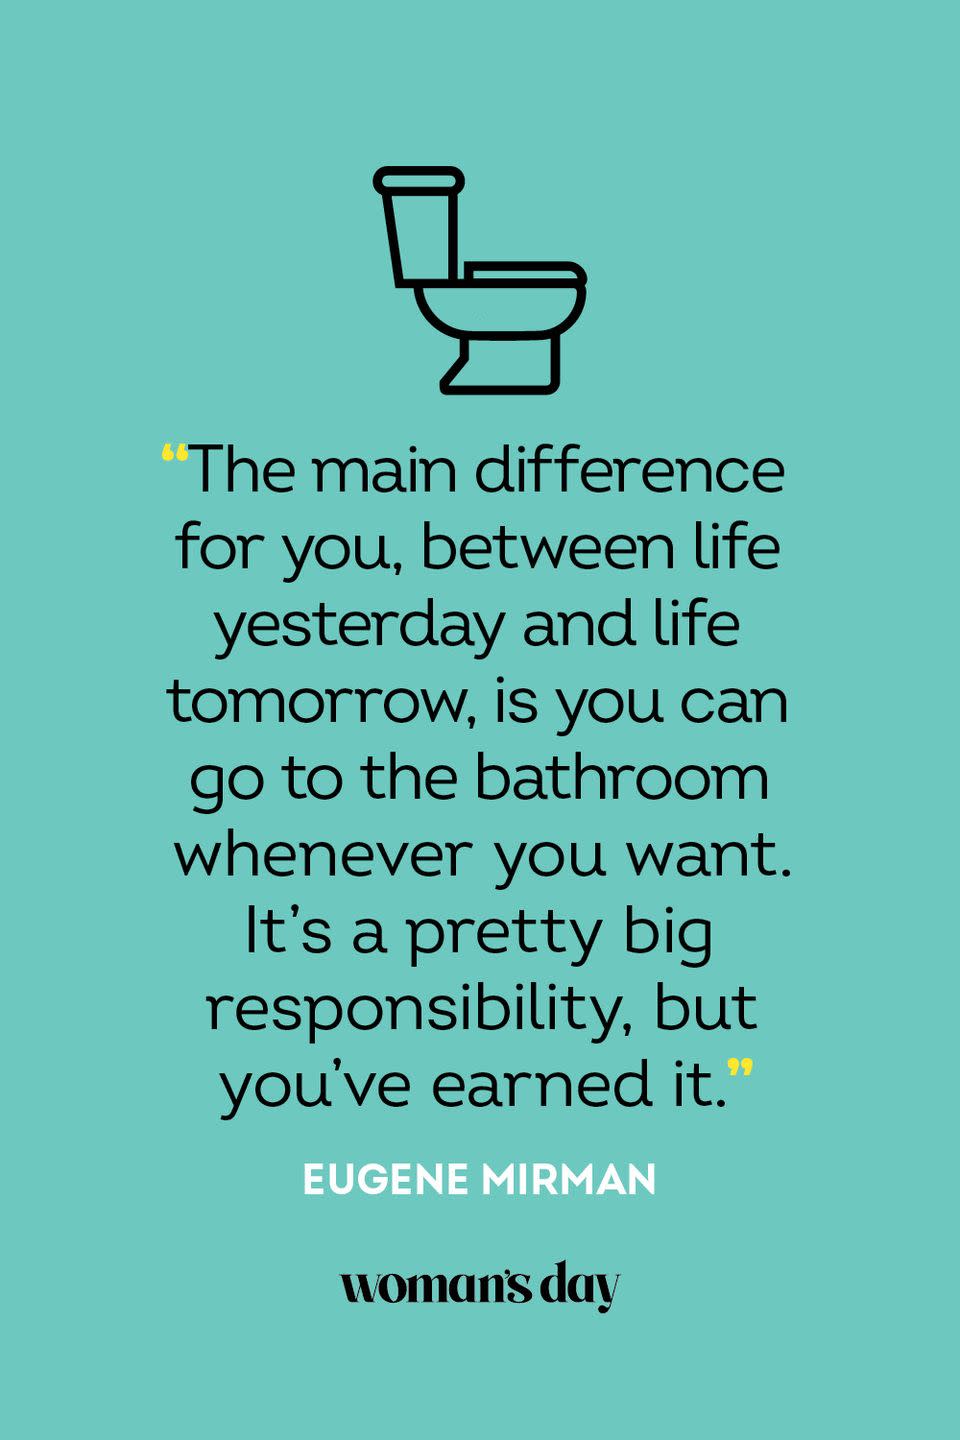 <p>"The main difference for you, between life yesterday and life tomorrow, is you can go to the bathroom whenever you want. It's a pretty big responsibility, but you've earned it."</p>